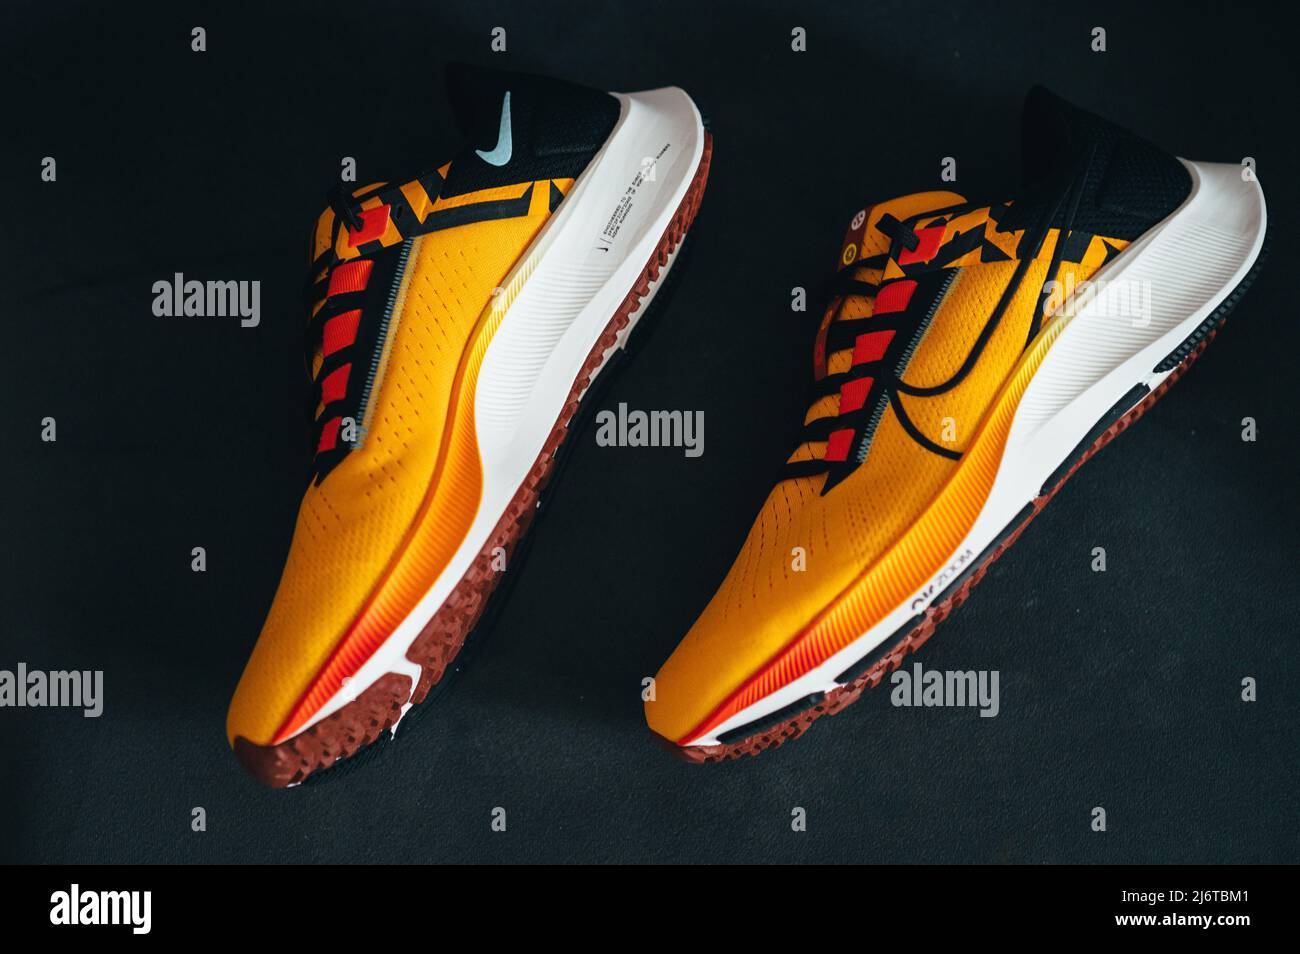 PARIS, FRANCE, MAY 3. 2022: Nike running shoes Pegasus 38 in yellow, black,  red and orange colors. Shoes with Zoom X Foam Stock Photo - Alamy